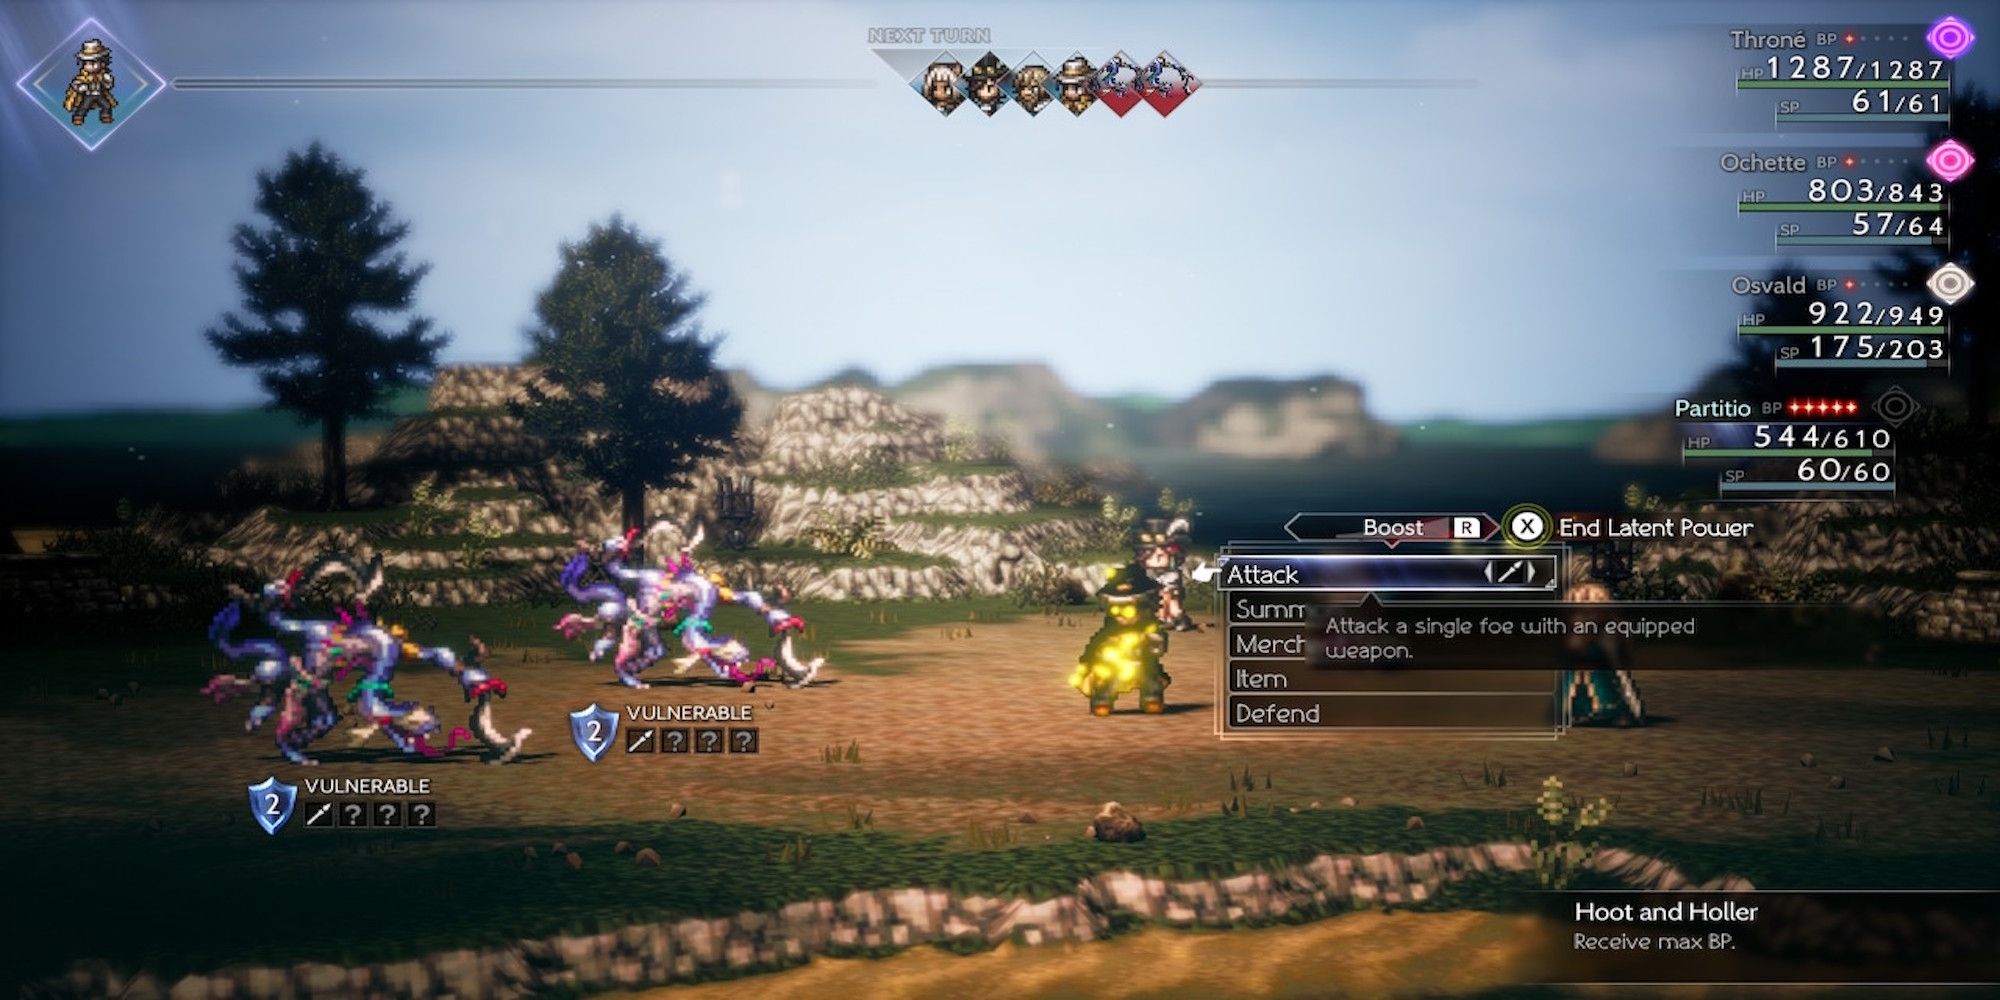 Partitio activating their Latent Power in battle in Octopath Traveler 2